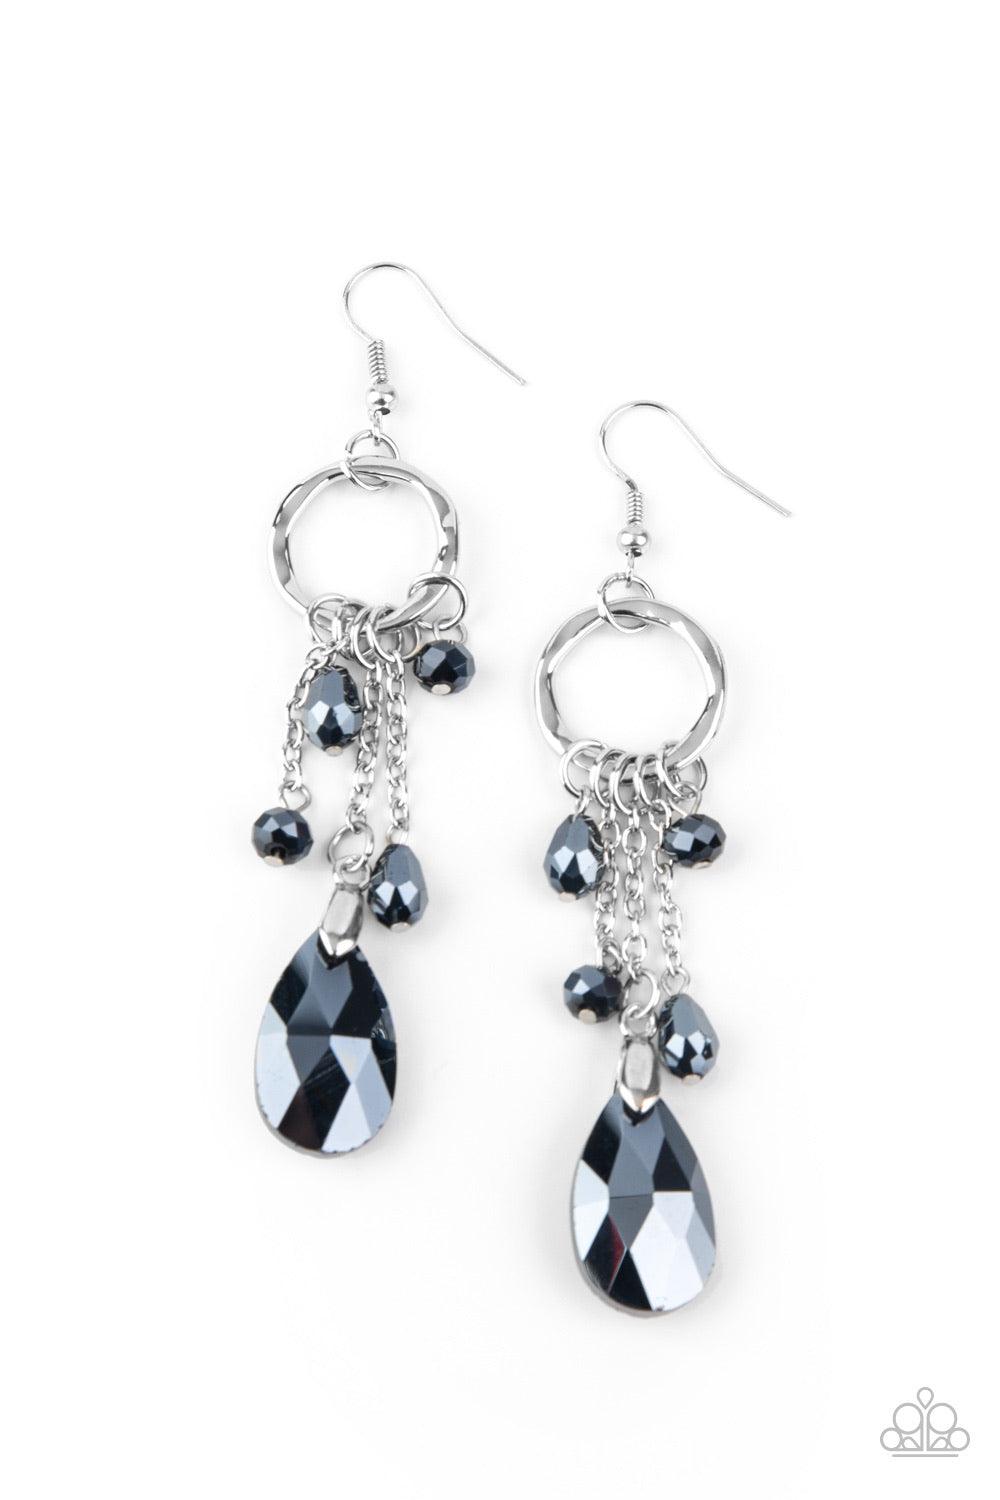 Paparazzi Accessories Glammed Up Goddess - Blue Attached to sections of shimmery silver chains, a mismatched collection of metallic blue crystal-like beads swing from the bottom of a hammered silver hoop for an elegantly exaggerated look. Earring attaches